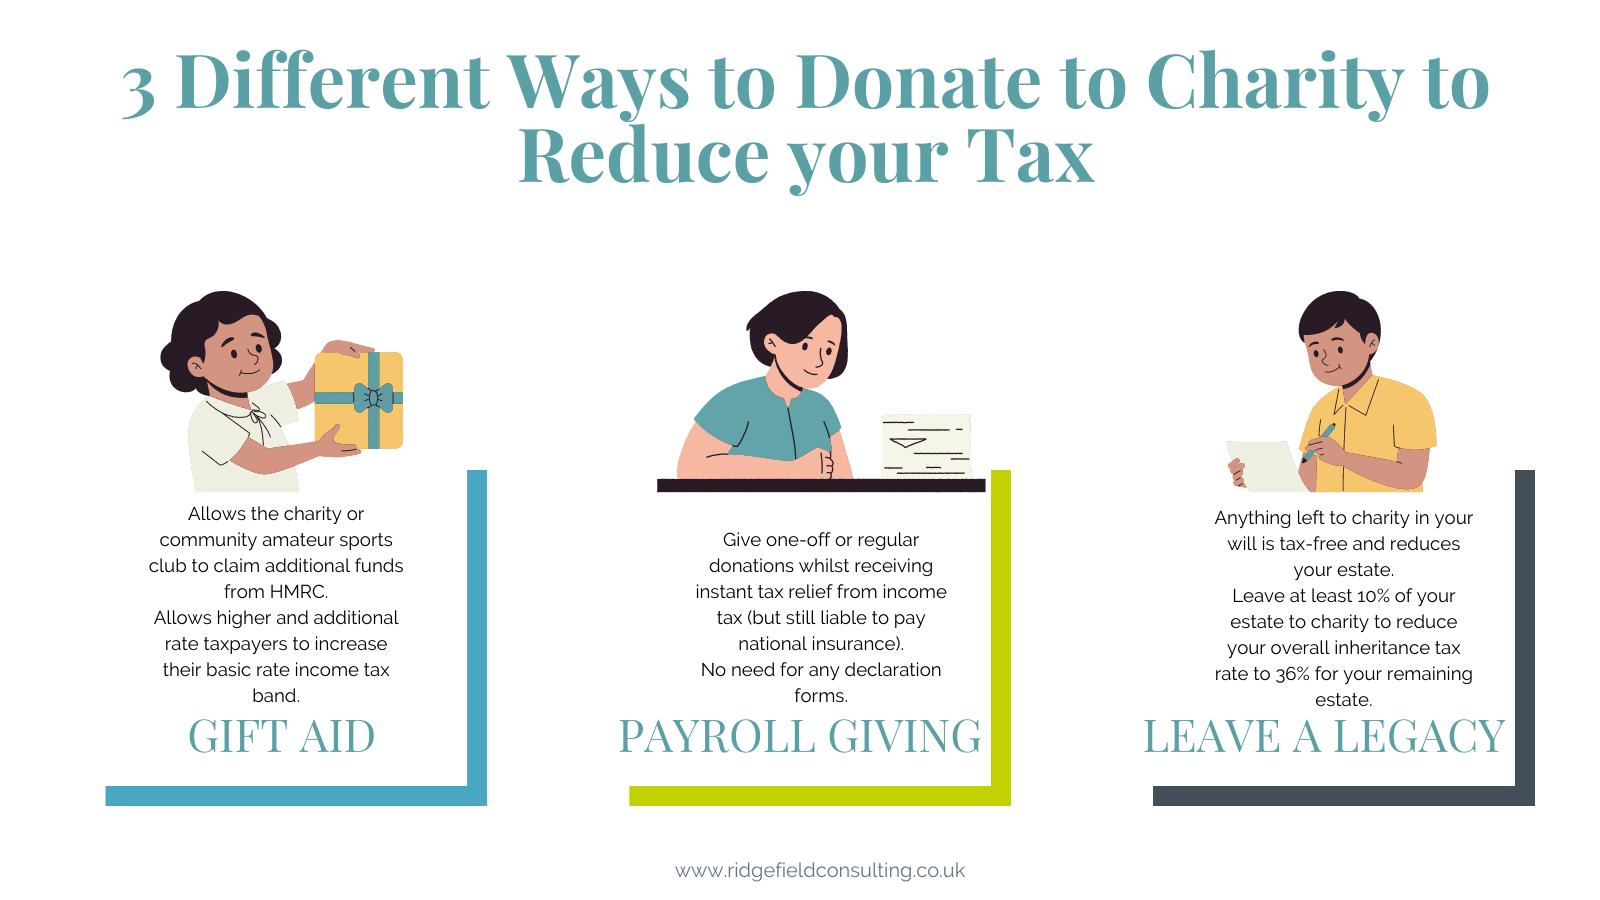 3 Different ways to donate to charity to reduce your tax infographic